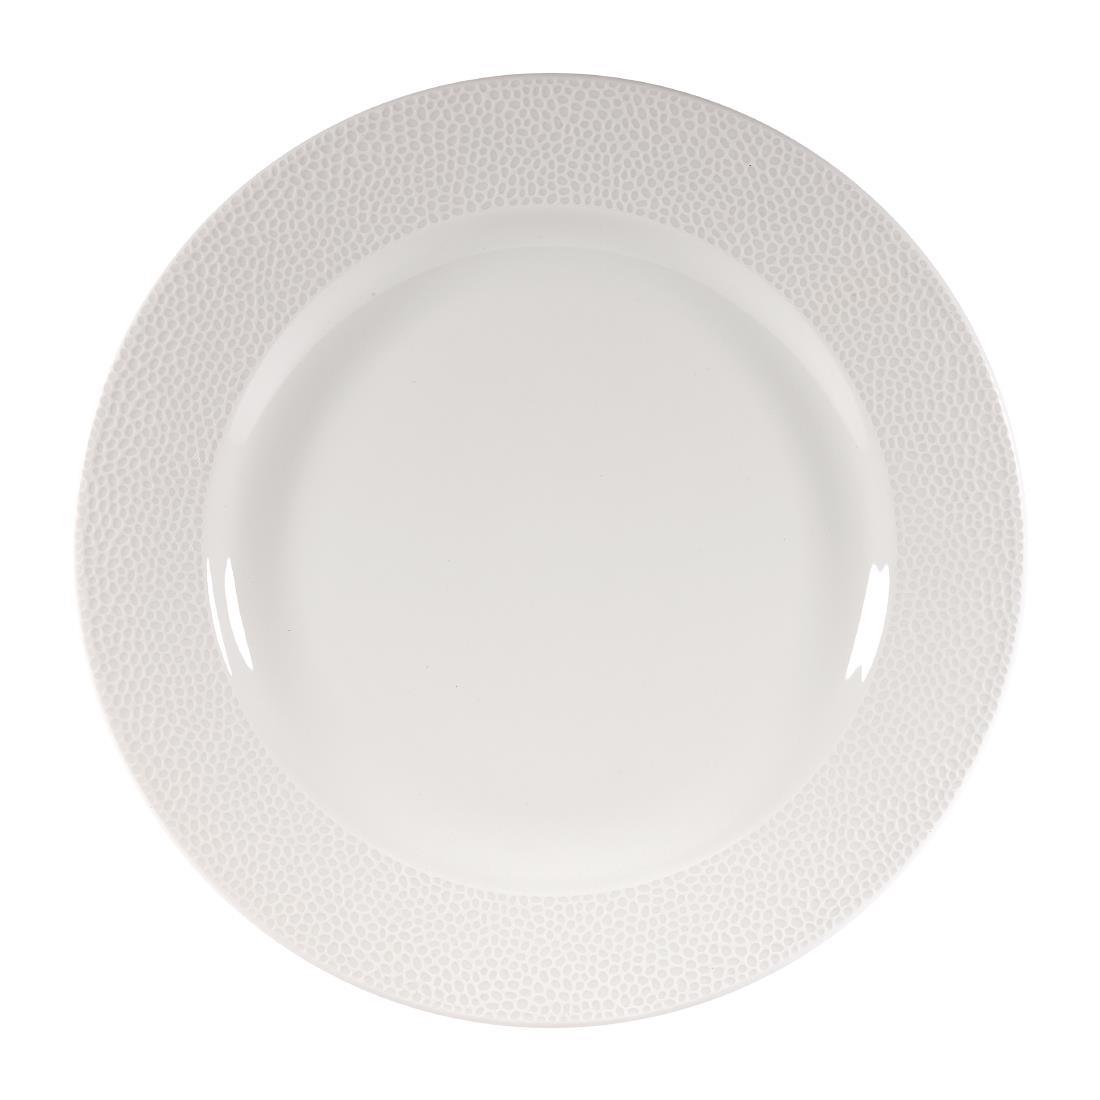 Churchill Isla Footed Plate White 276mm (Pack of 12) - DY832  - 1